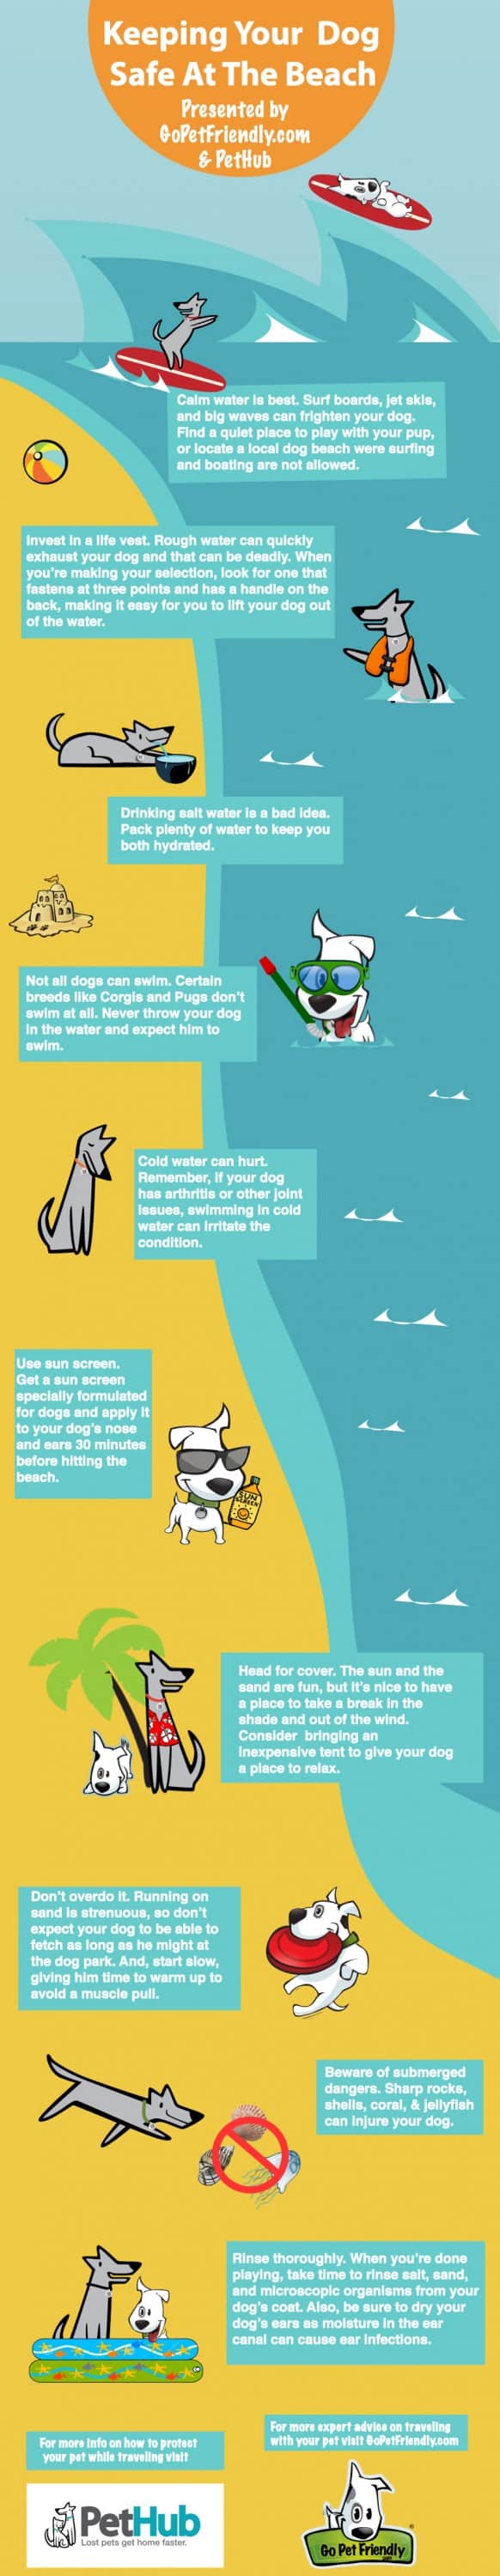 Infographic - Keeping Dogs Safe at the Beach